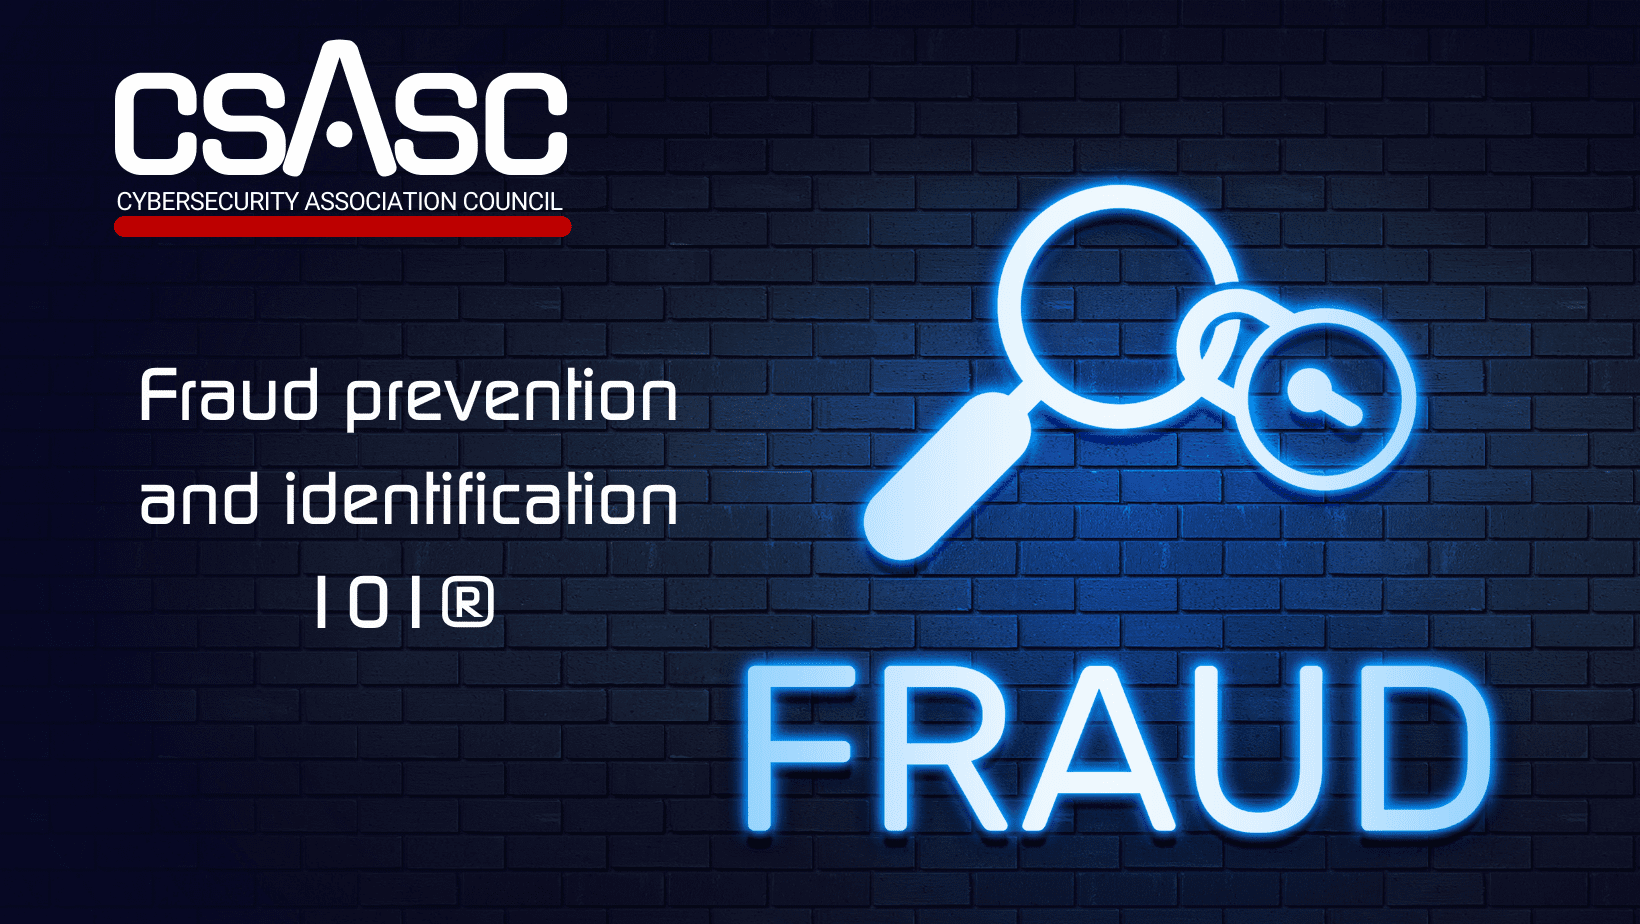 Fraud prevention and identification 101®